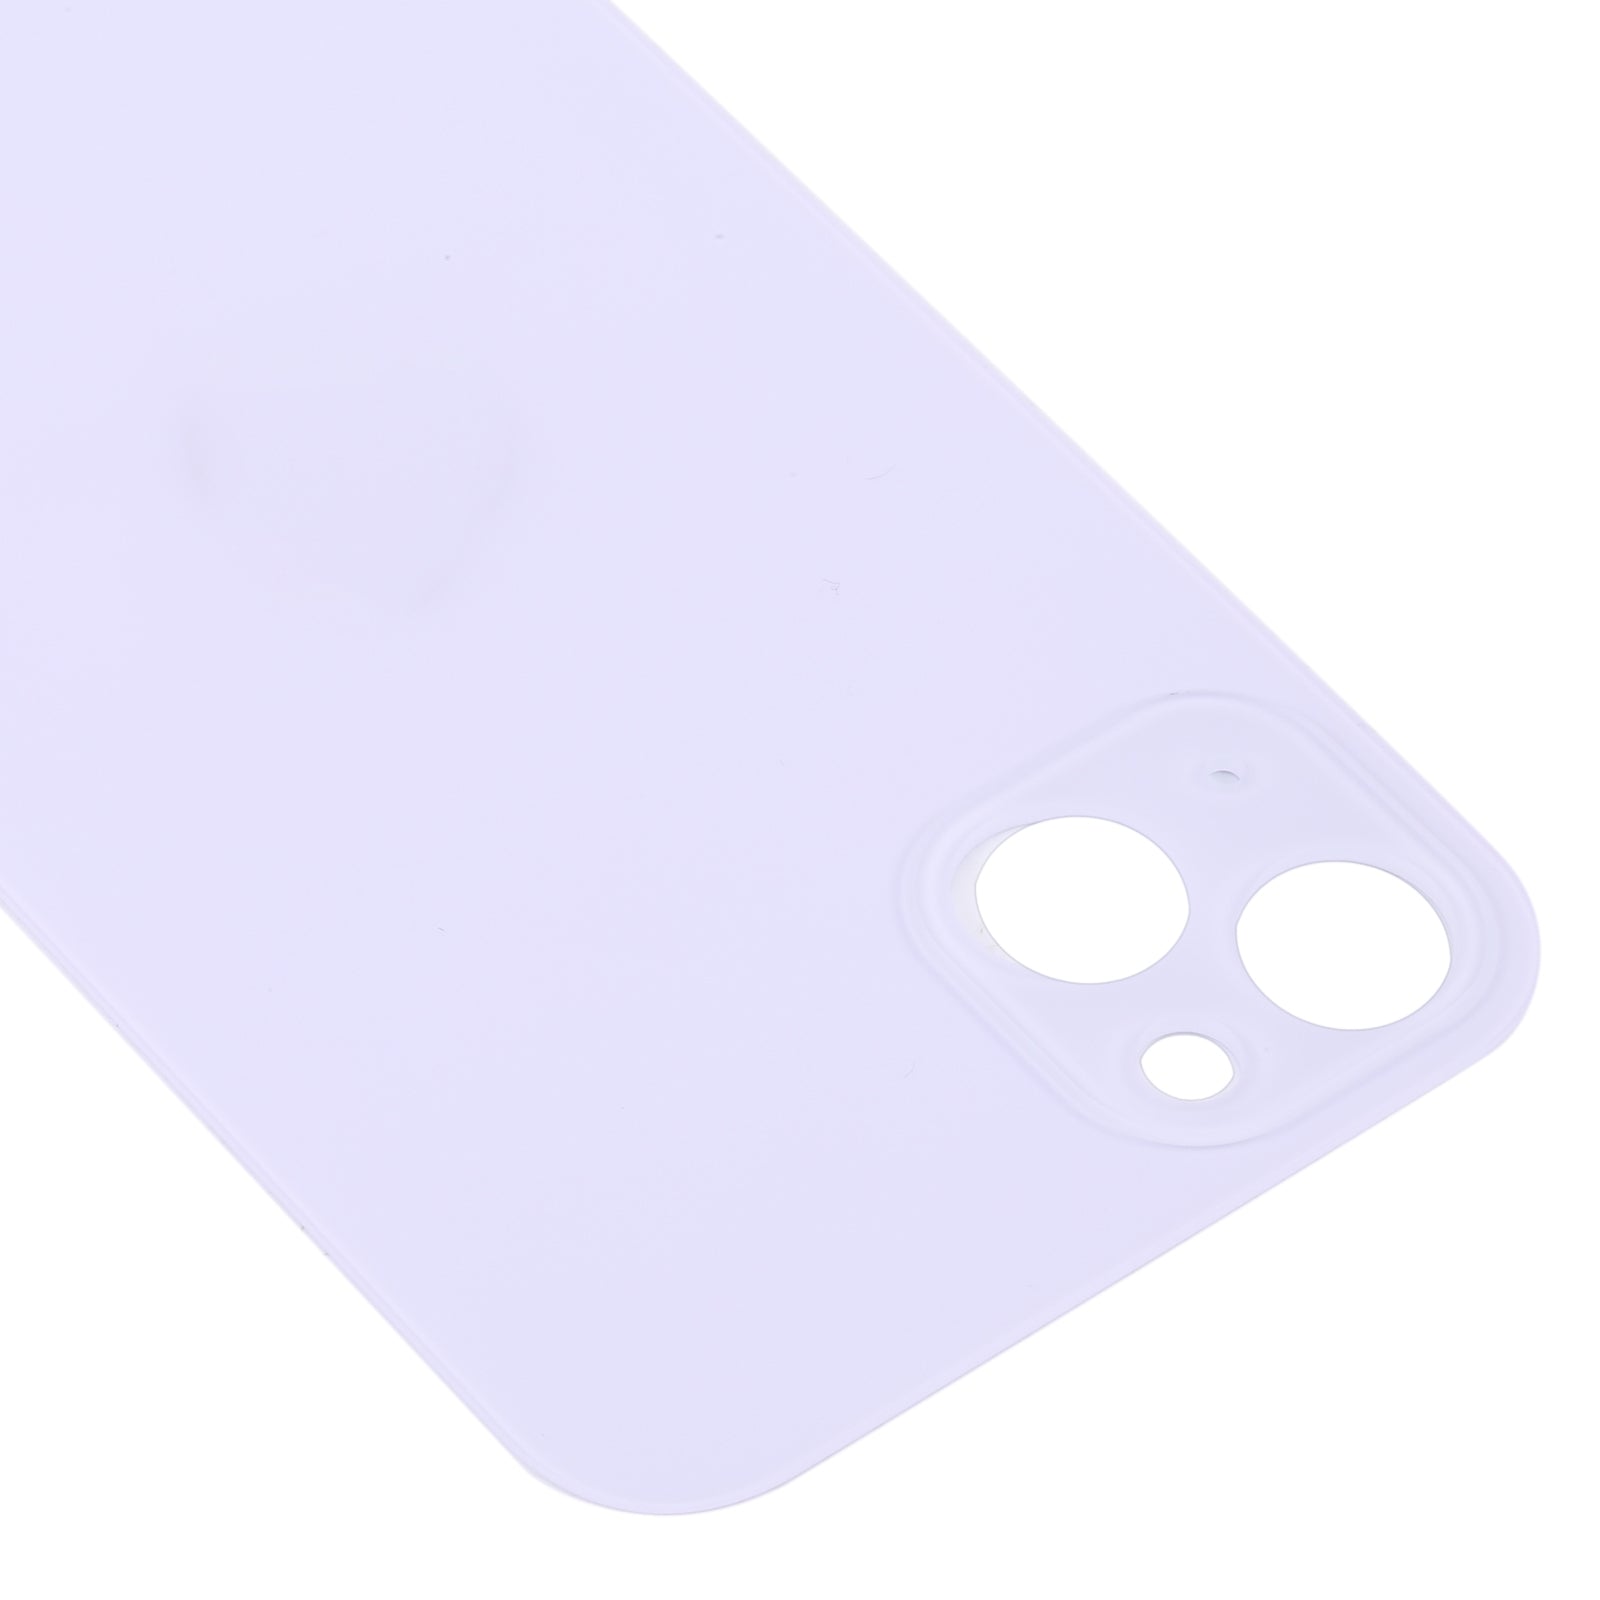 Battery Cover Back Cover Apple iPhone 14 Plus Purple